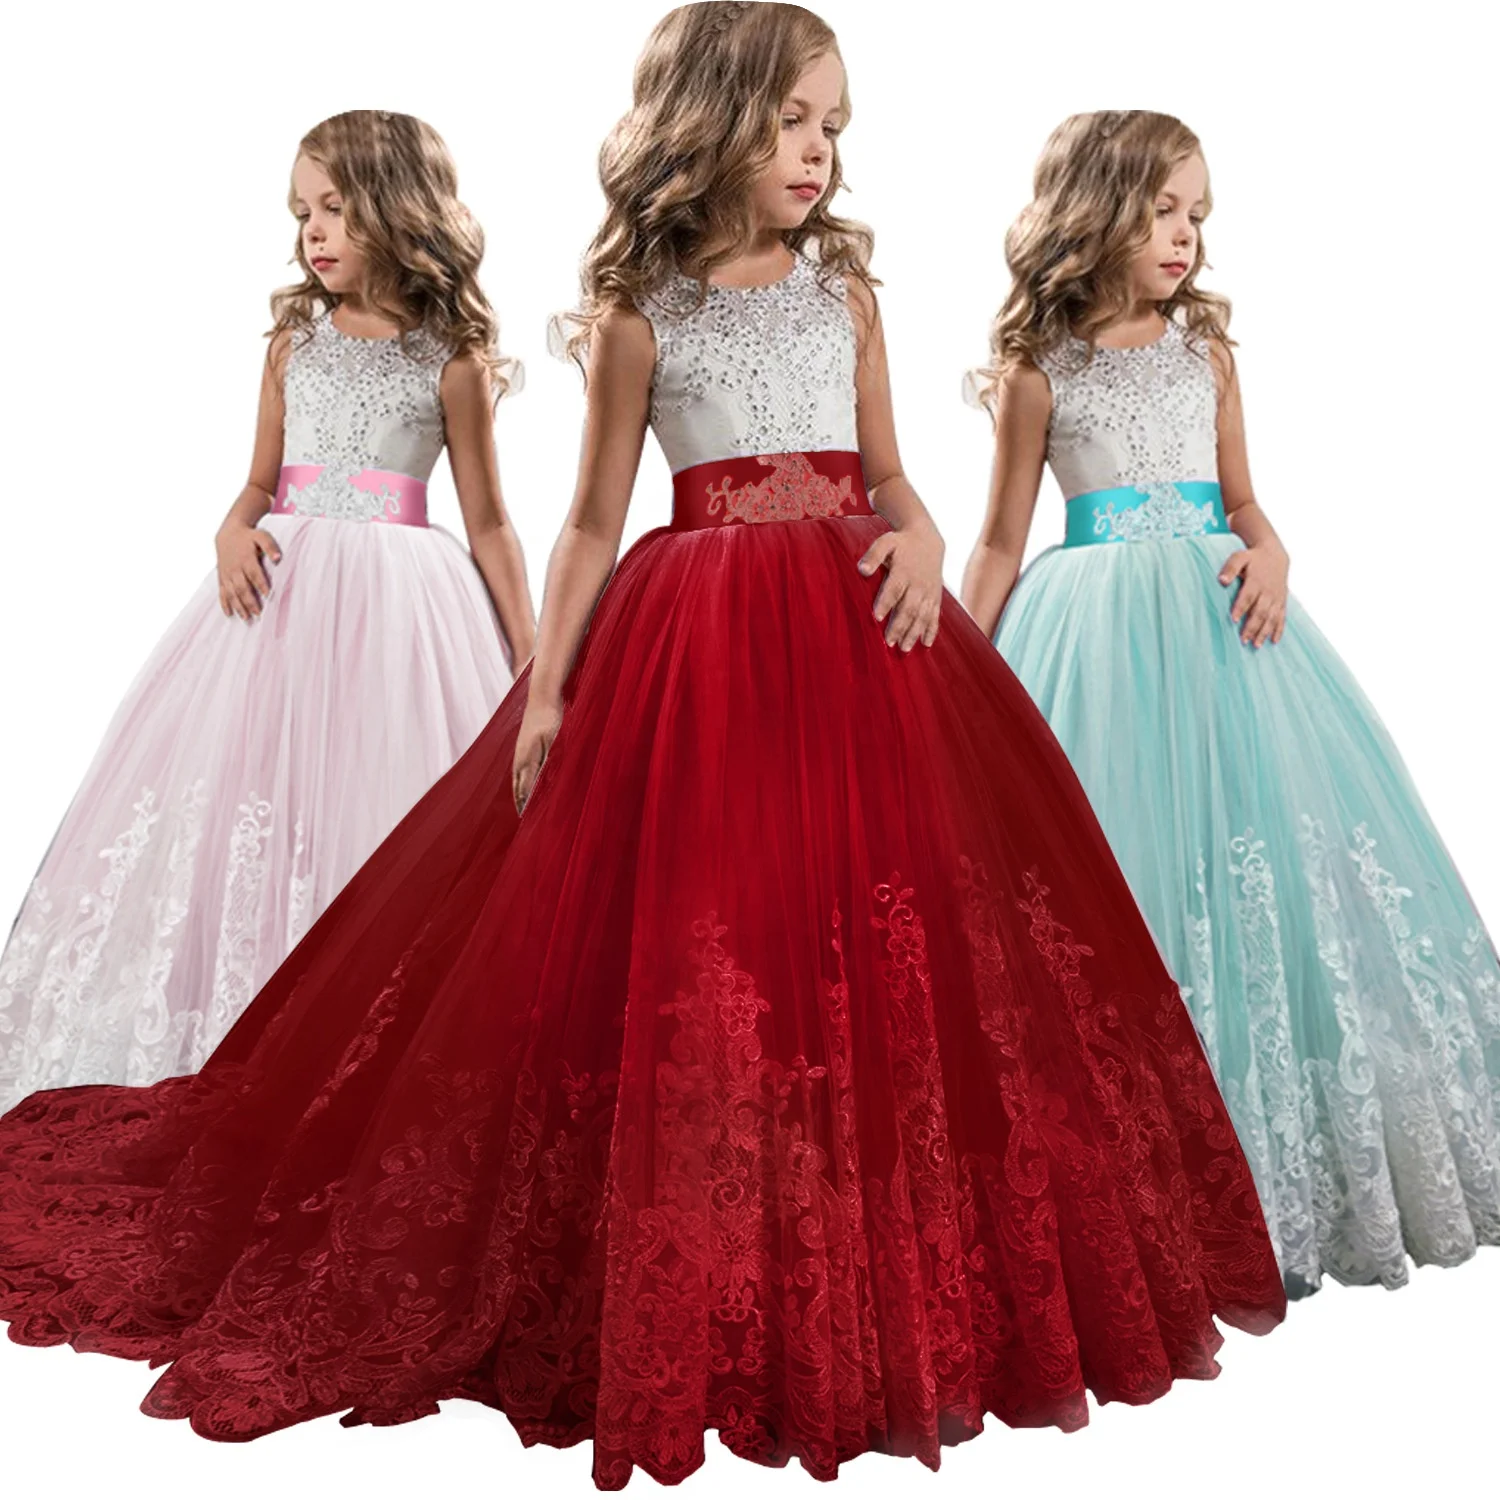 US Girls Princess Dress Party Formal Wedding Birthday Maxi Lace Tulle Prom Gown